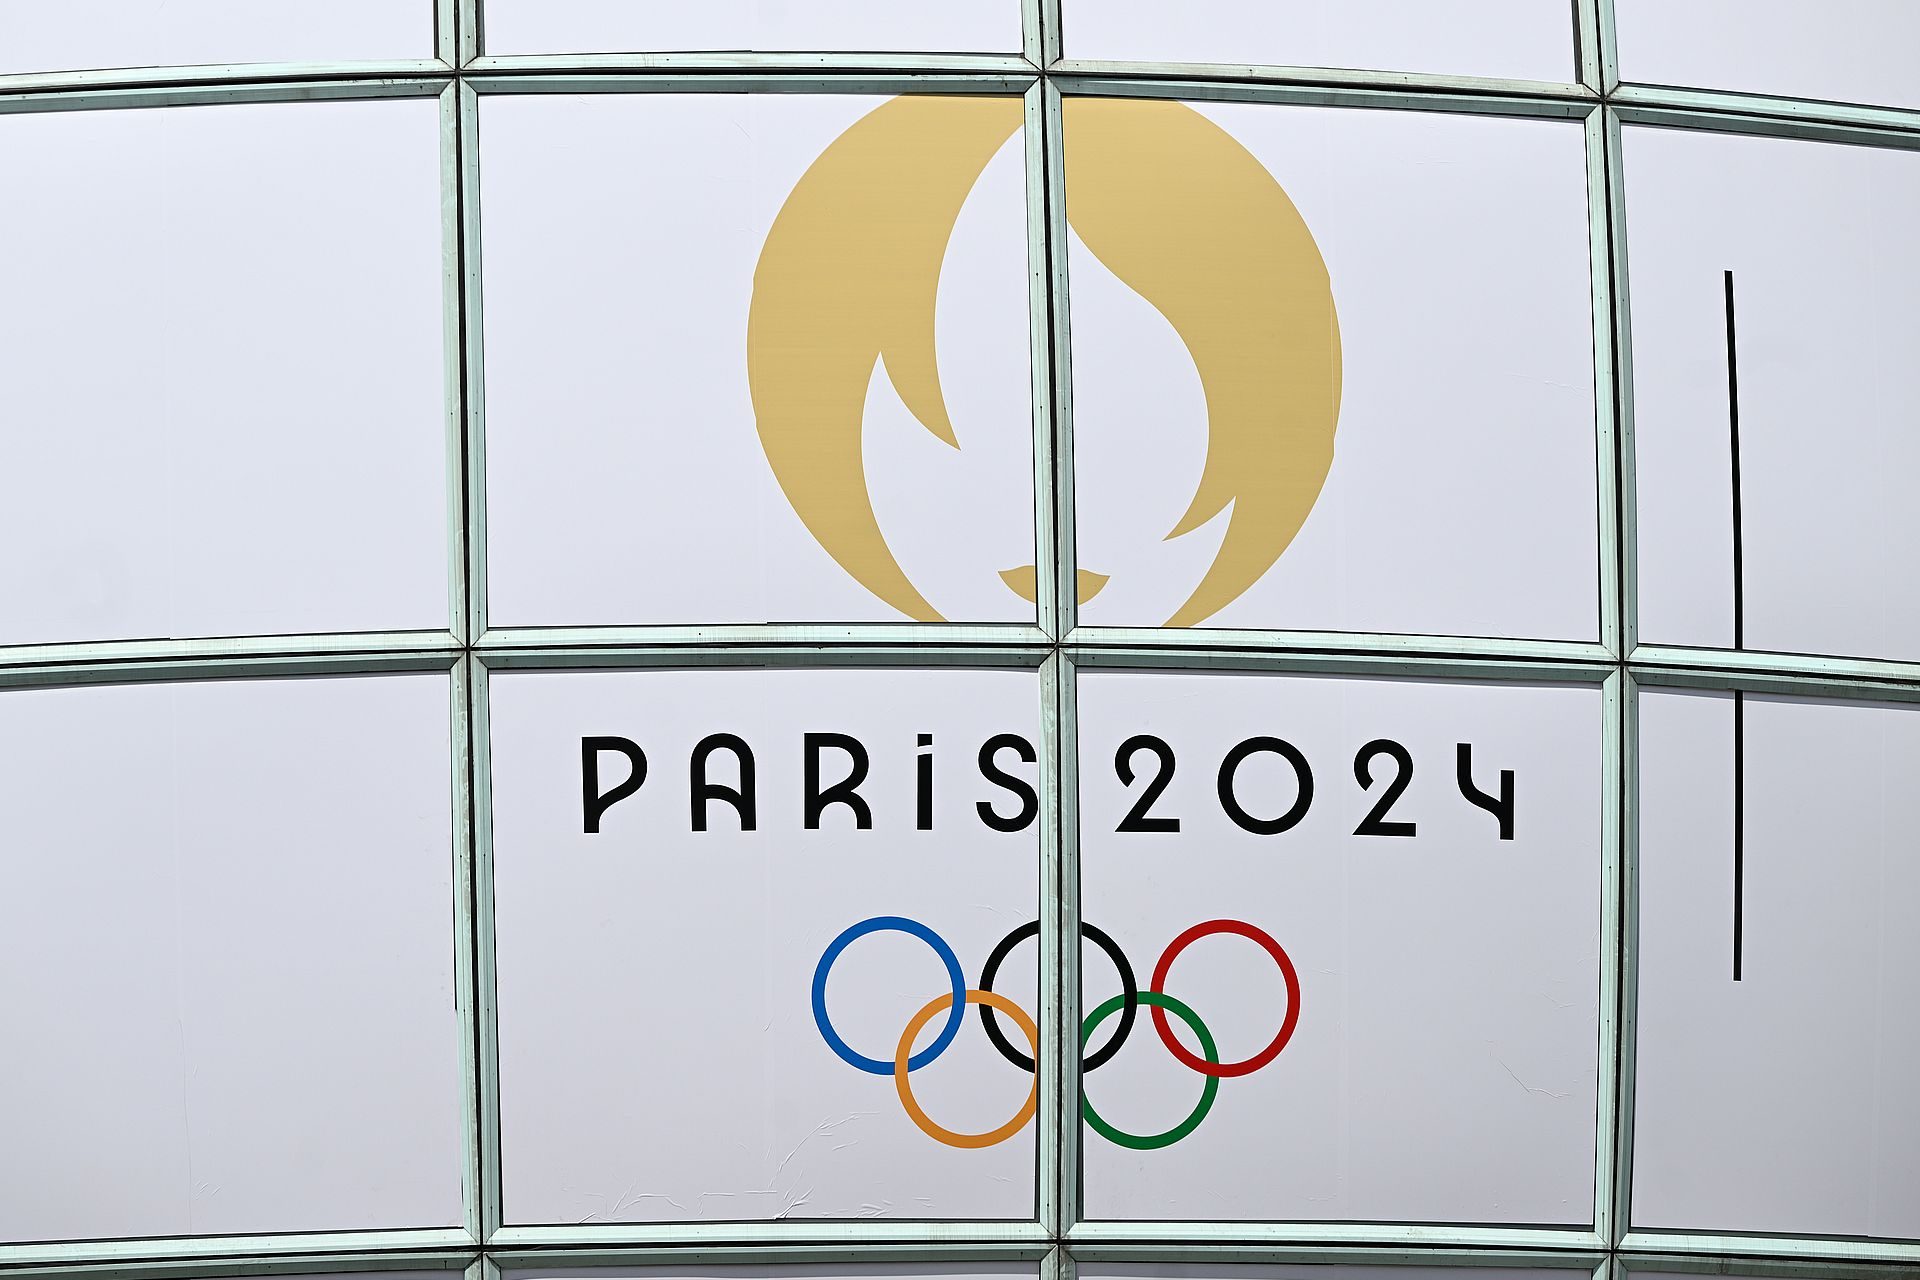 The Olympic Games in Paris 2024